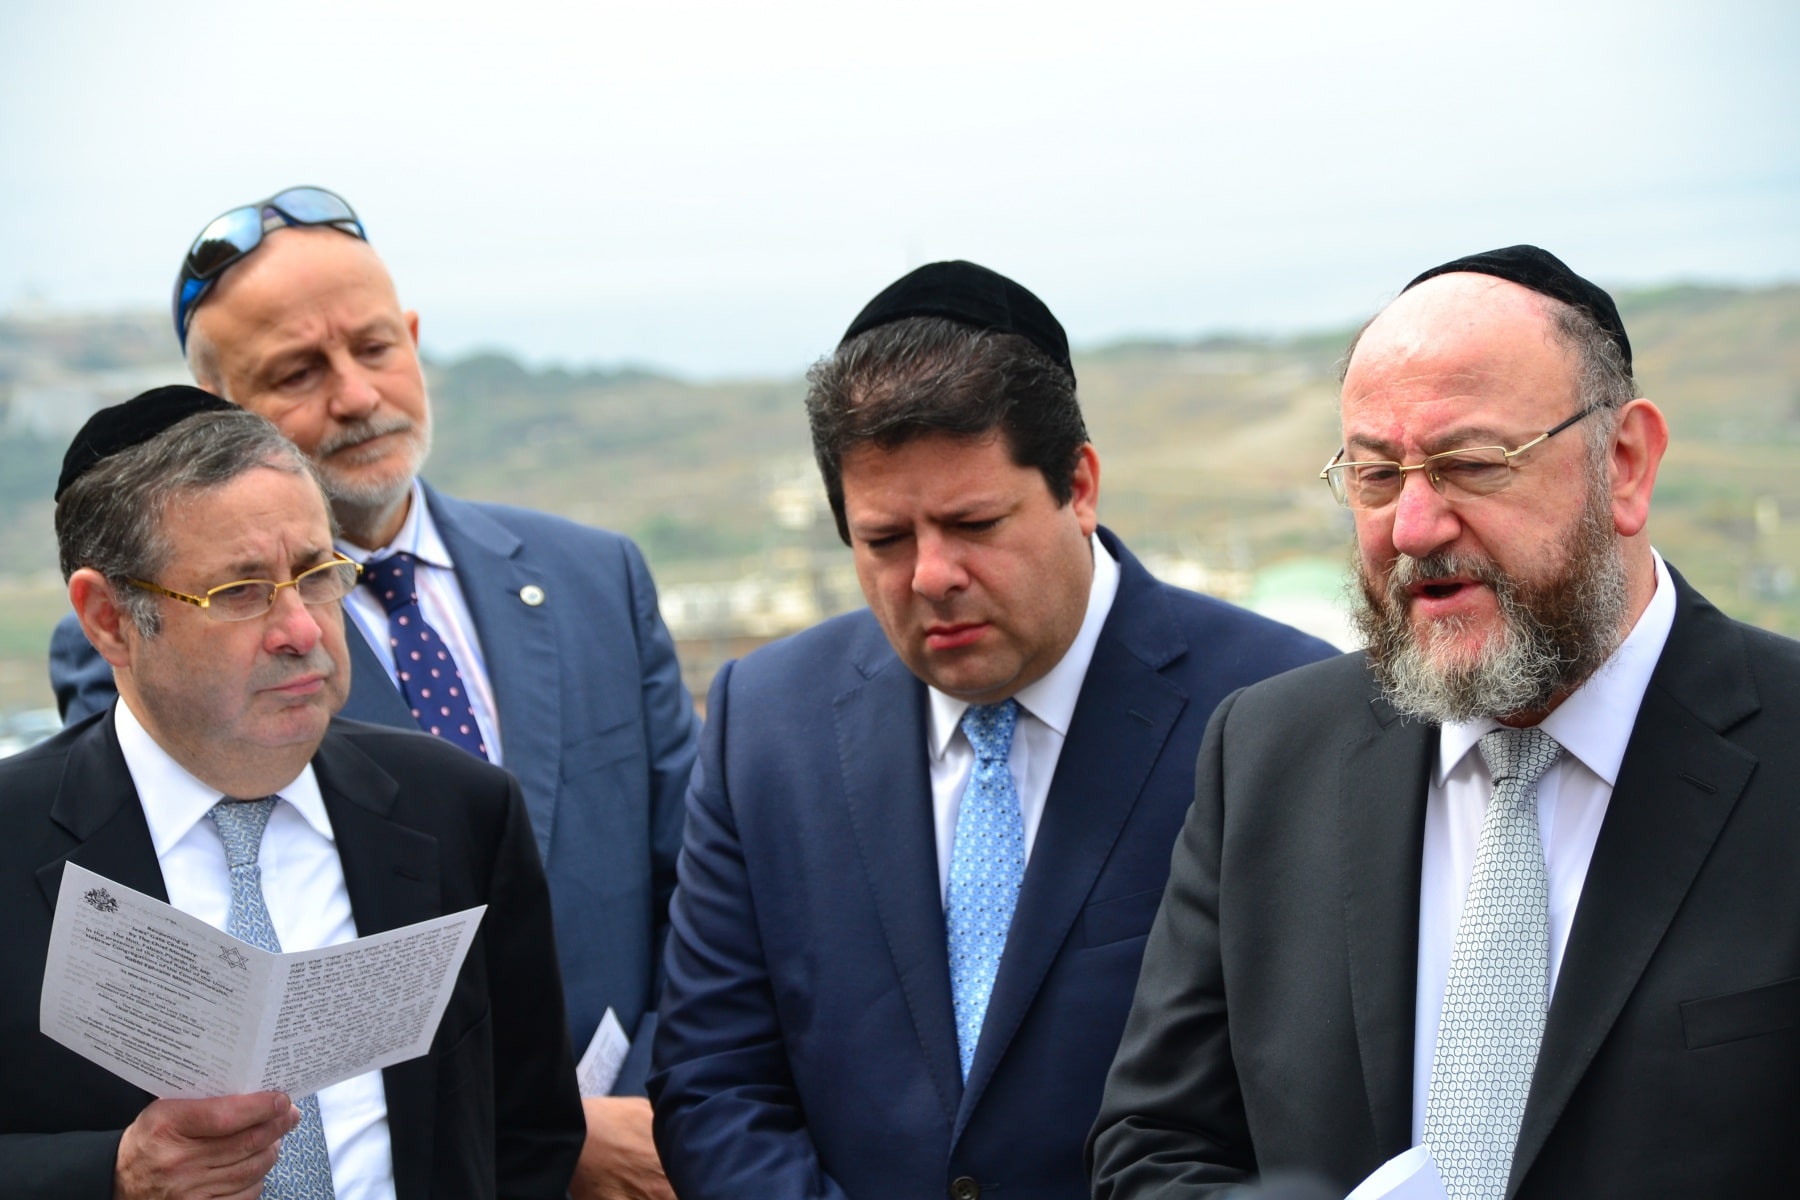 Chief Rabbi of Commonwealth at Jews Gate Cemetery opening